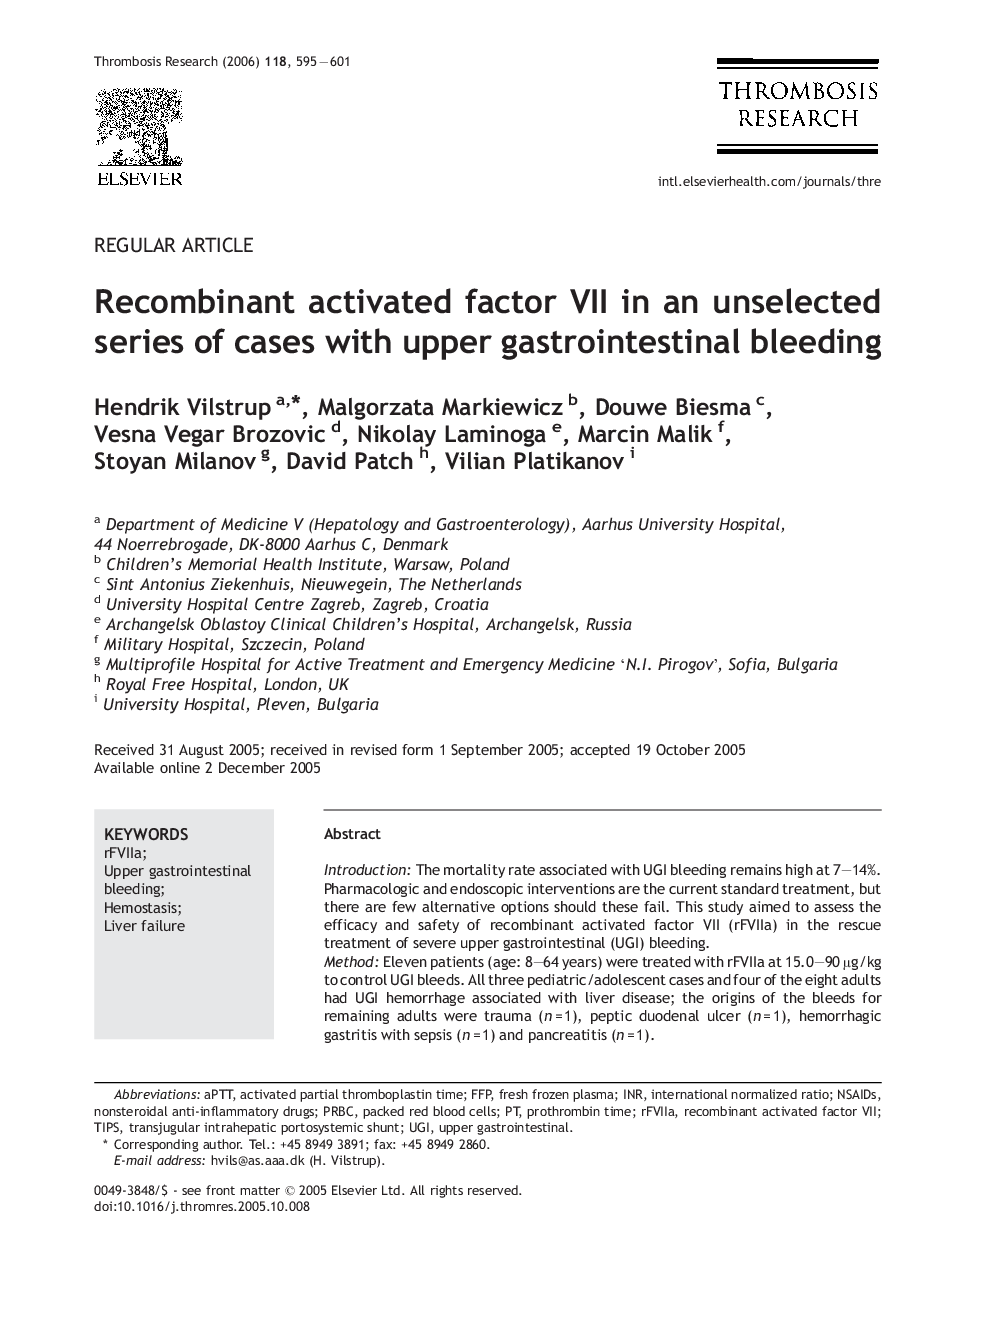 Recombinant activated factor VII in an unselected series of cases with upper gastrointestinal bleeding